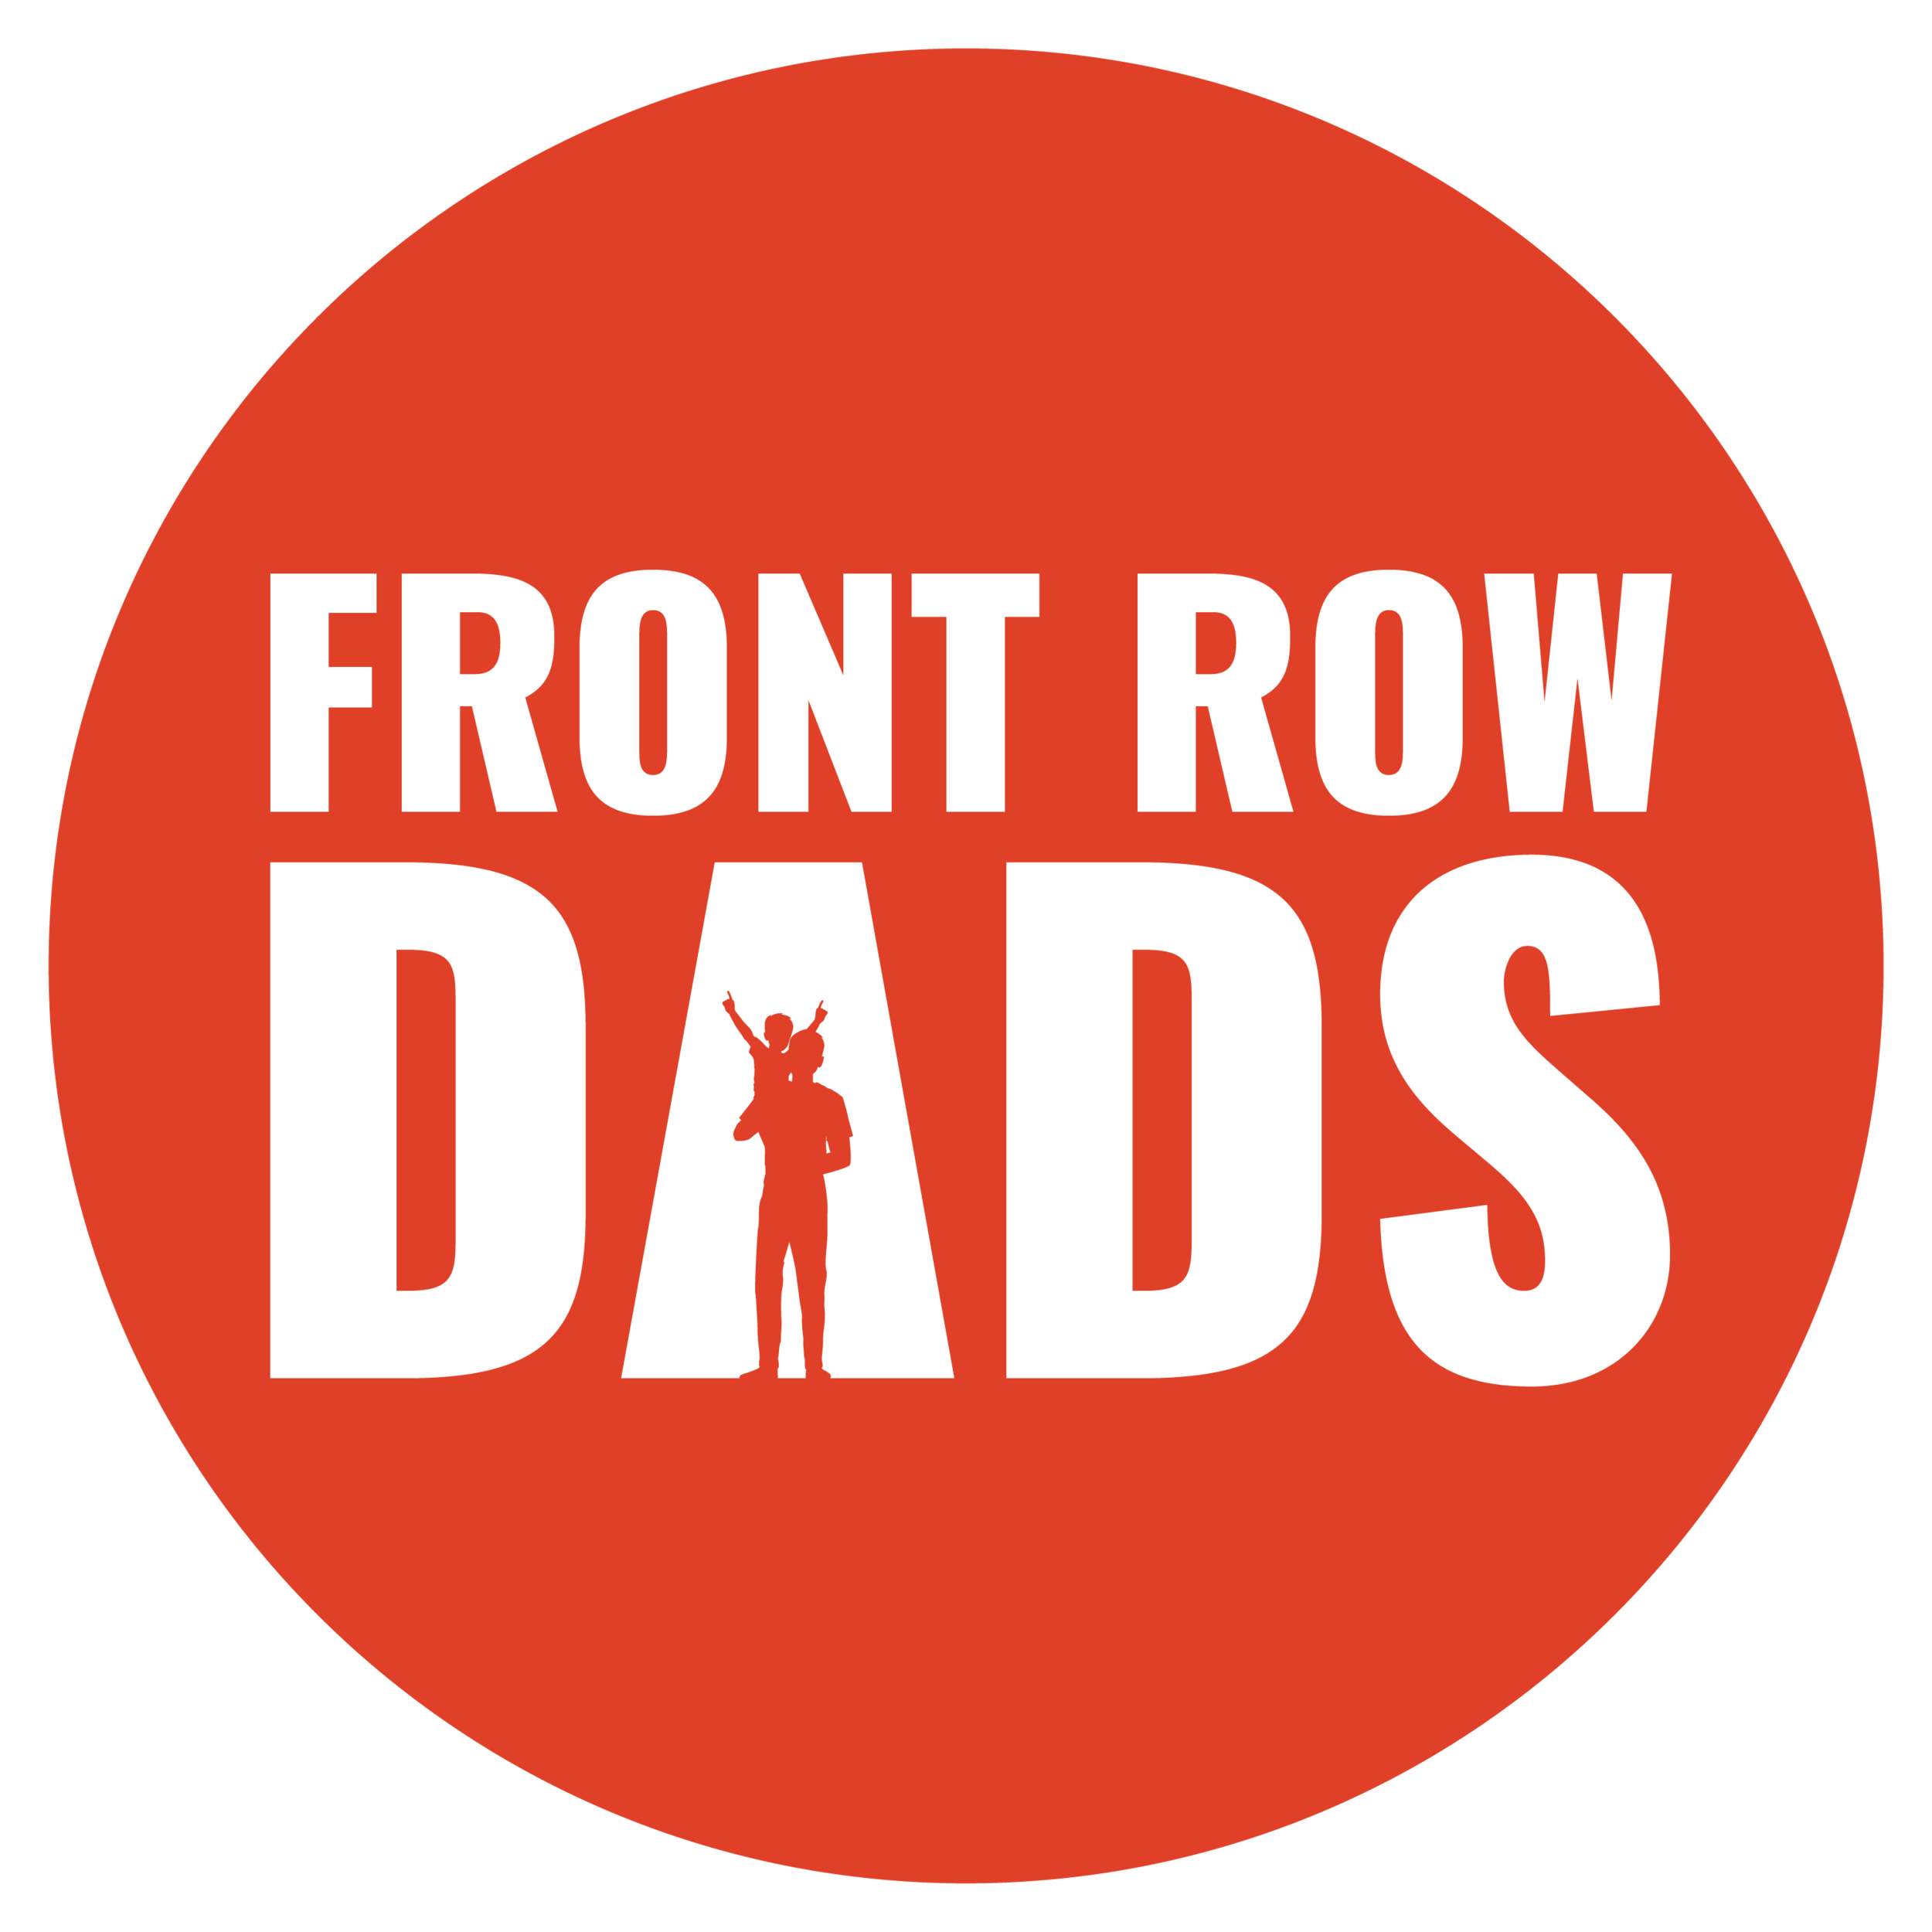 frontrowdads1.png